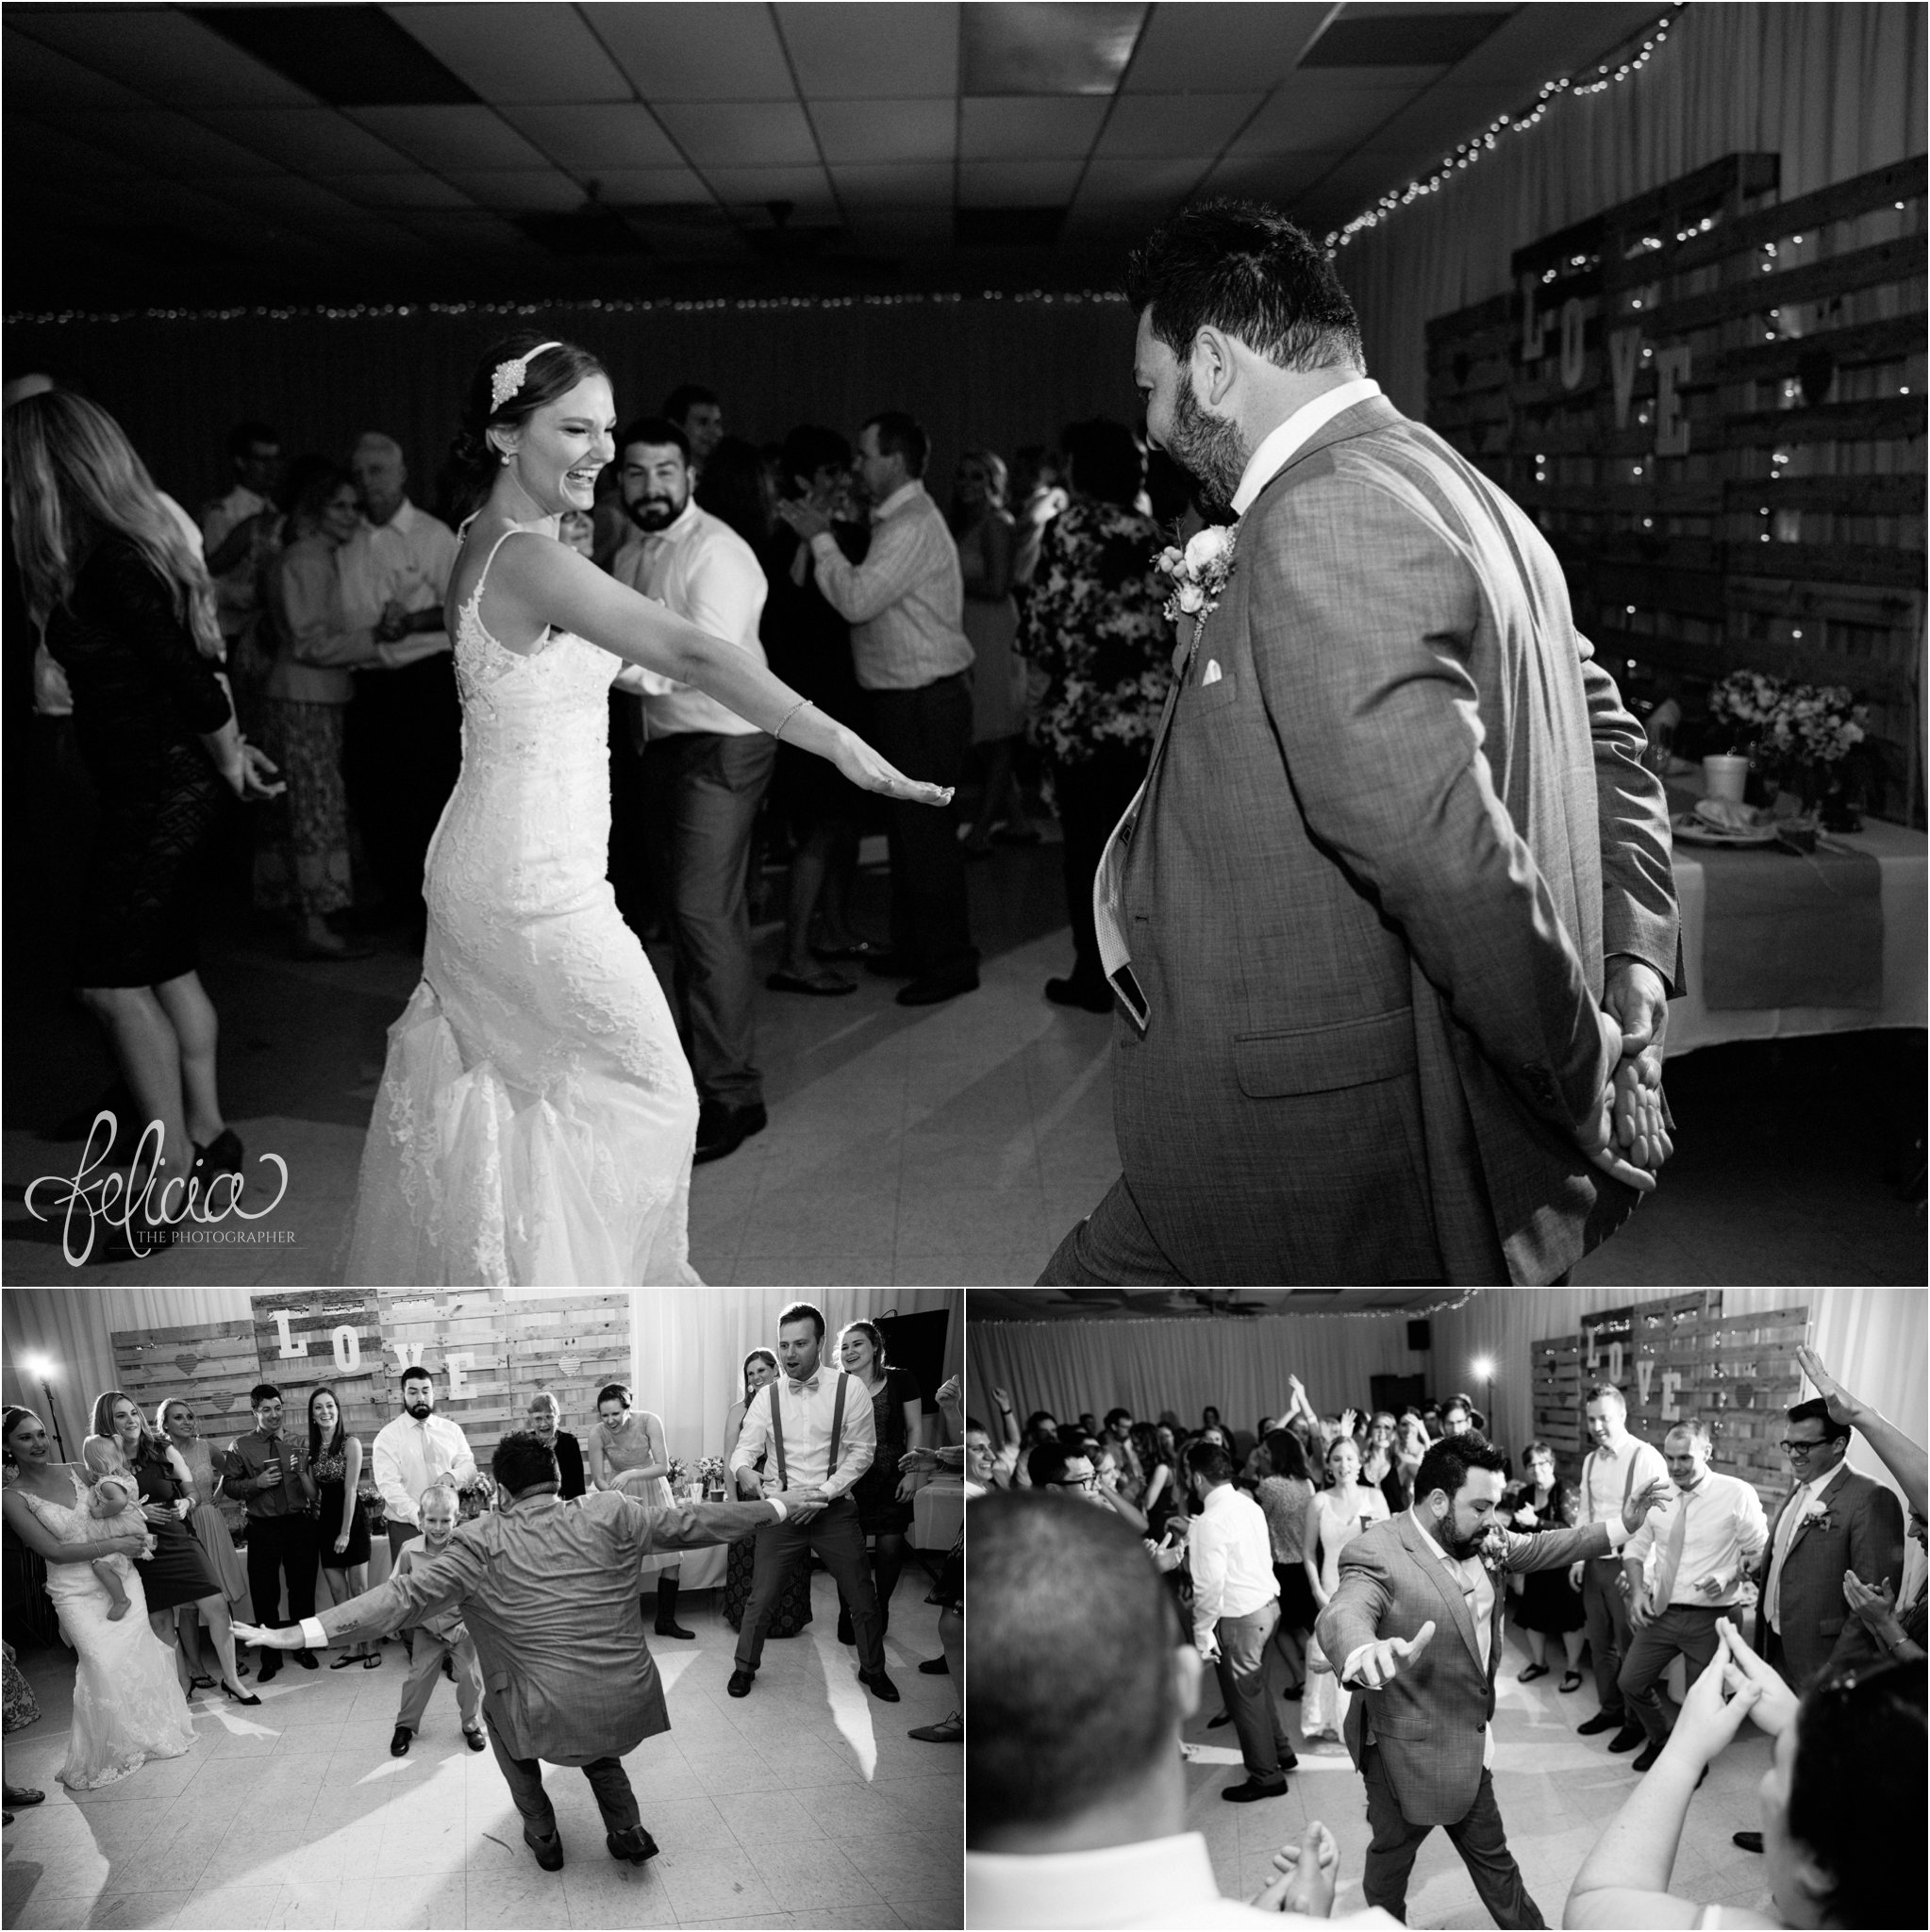 Black and White | Wedding | Wedding Photography | Wedding Photos | Travel Photographer | Images by feliciathephotographer.com | Kansas | Wedding Reception | Reception Activities | Dancing | Party | Candid 